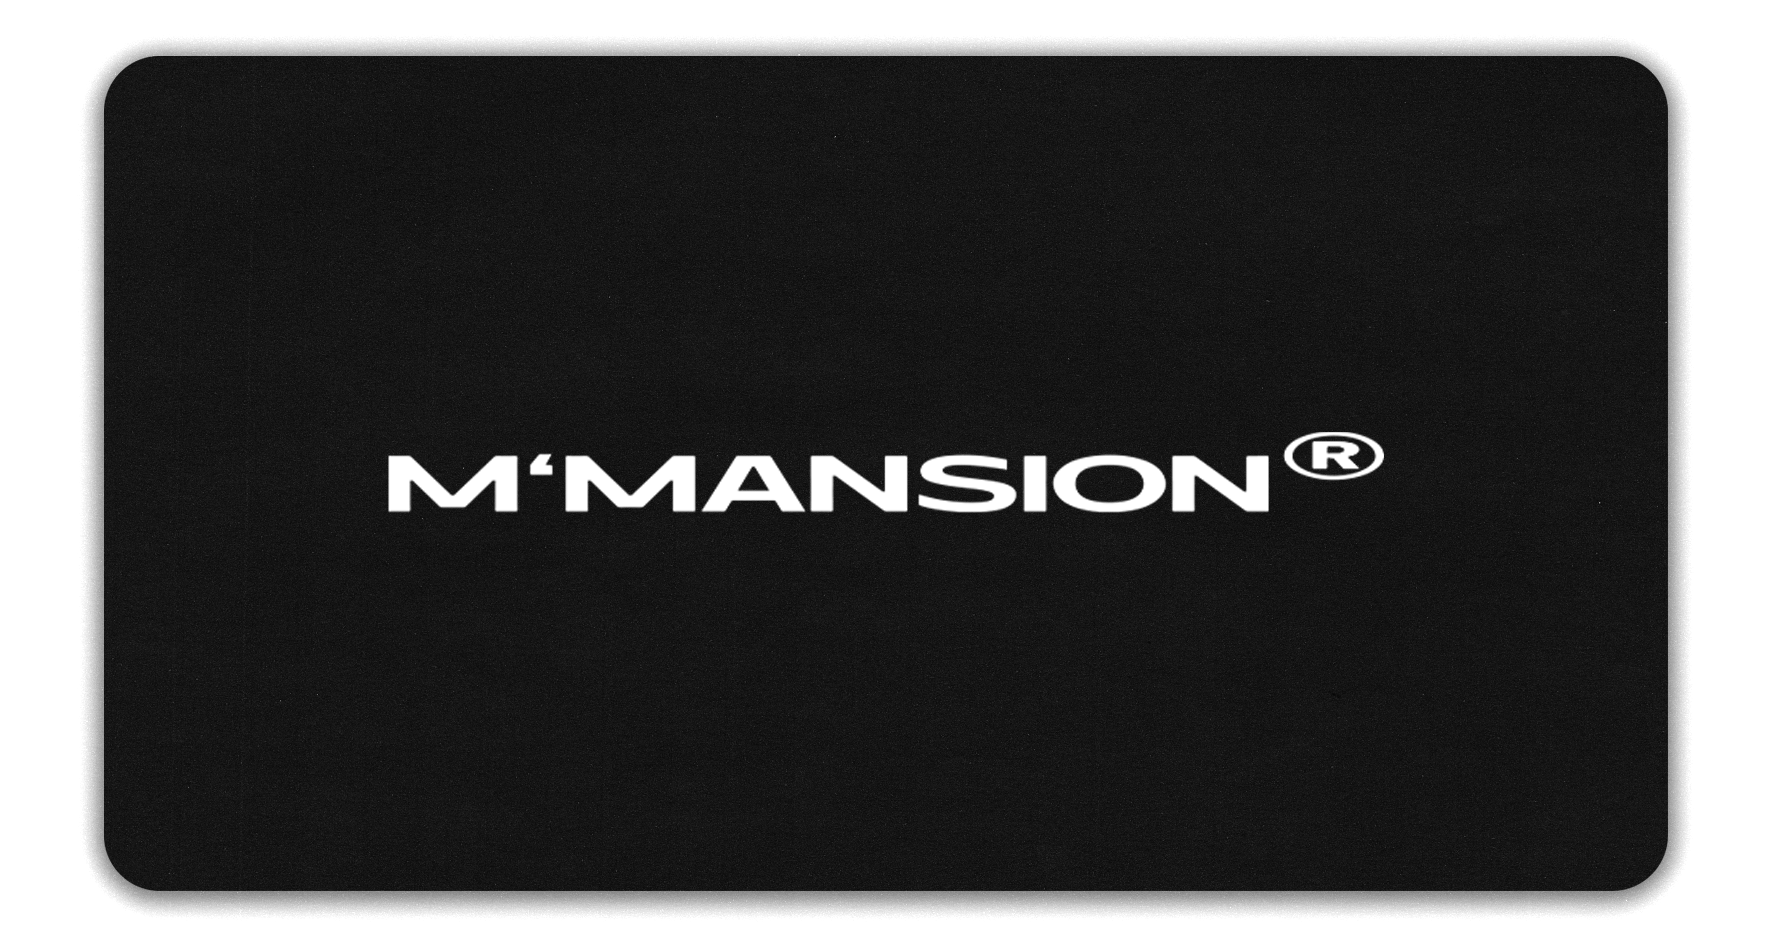 M'MANSION GIFTCARD